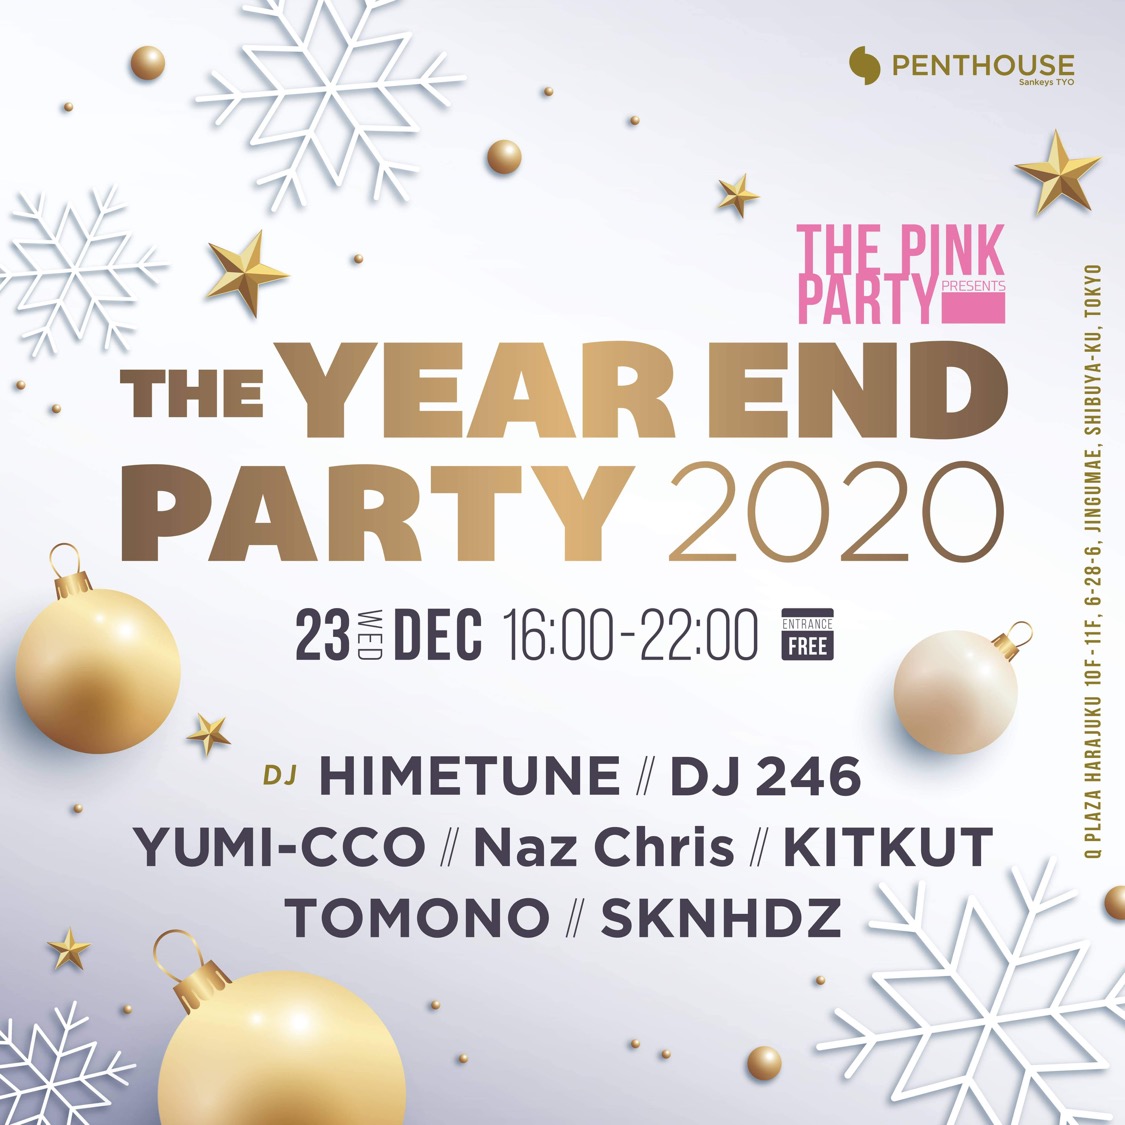 THE PINK PARTY PRESENTS -THE YEAR END PARTY 2020-